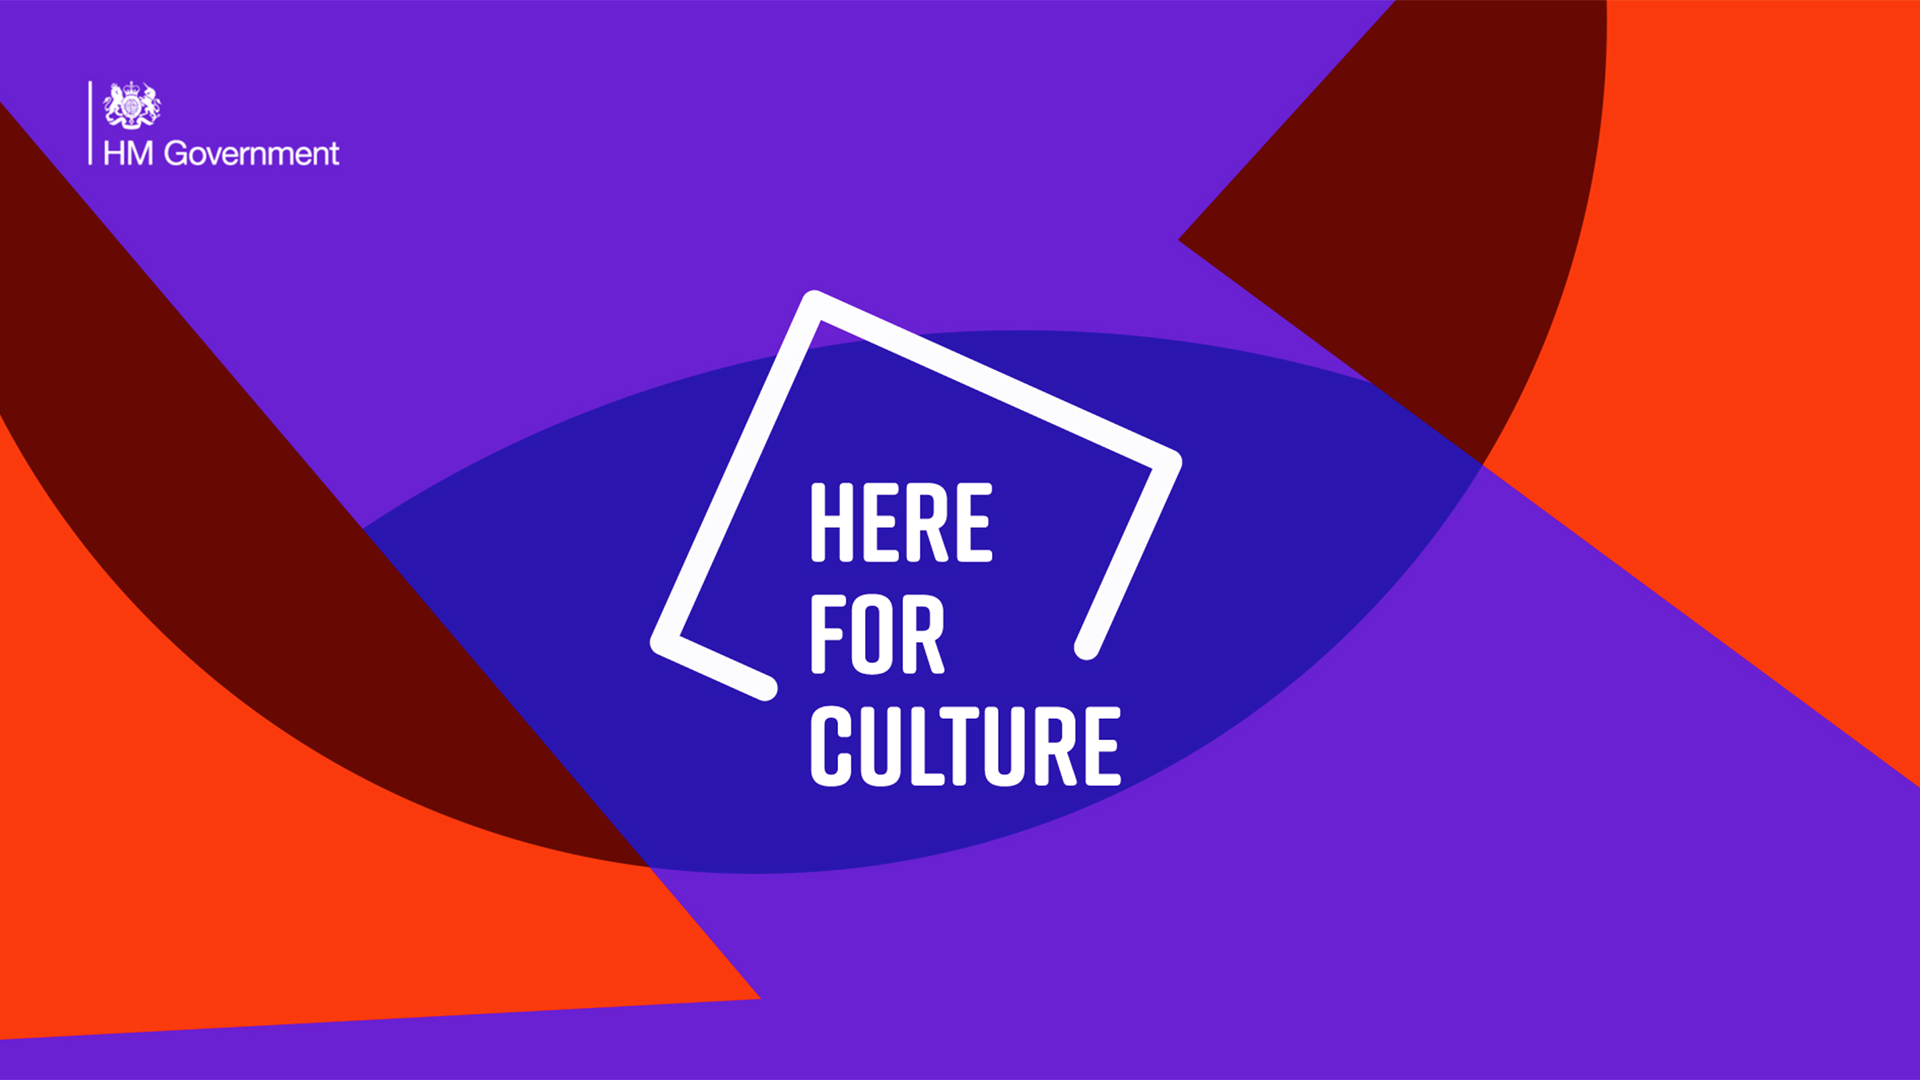 HM Government - Here for Culture